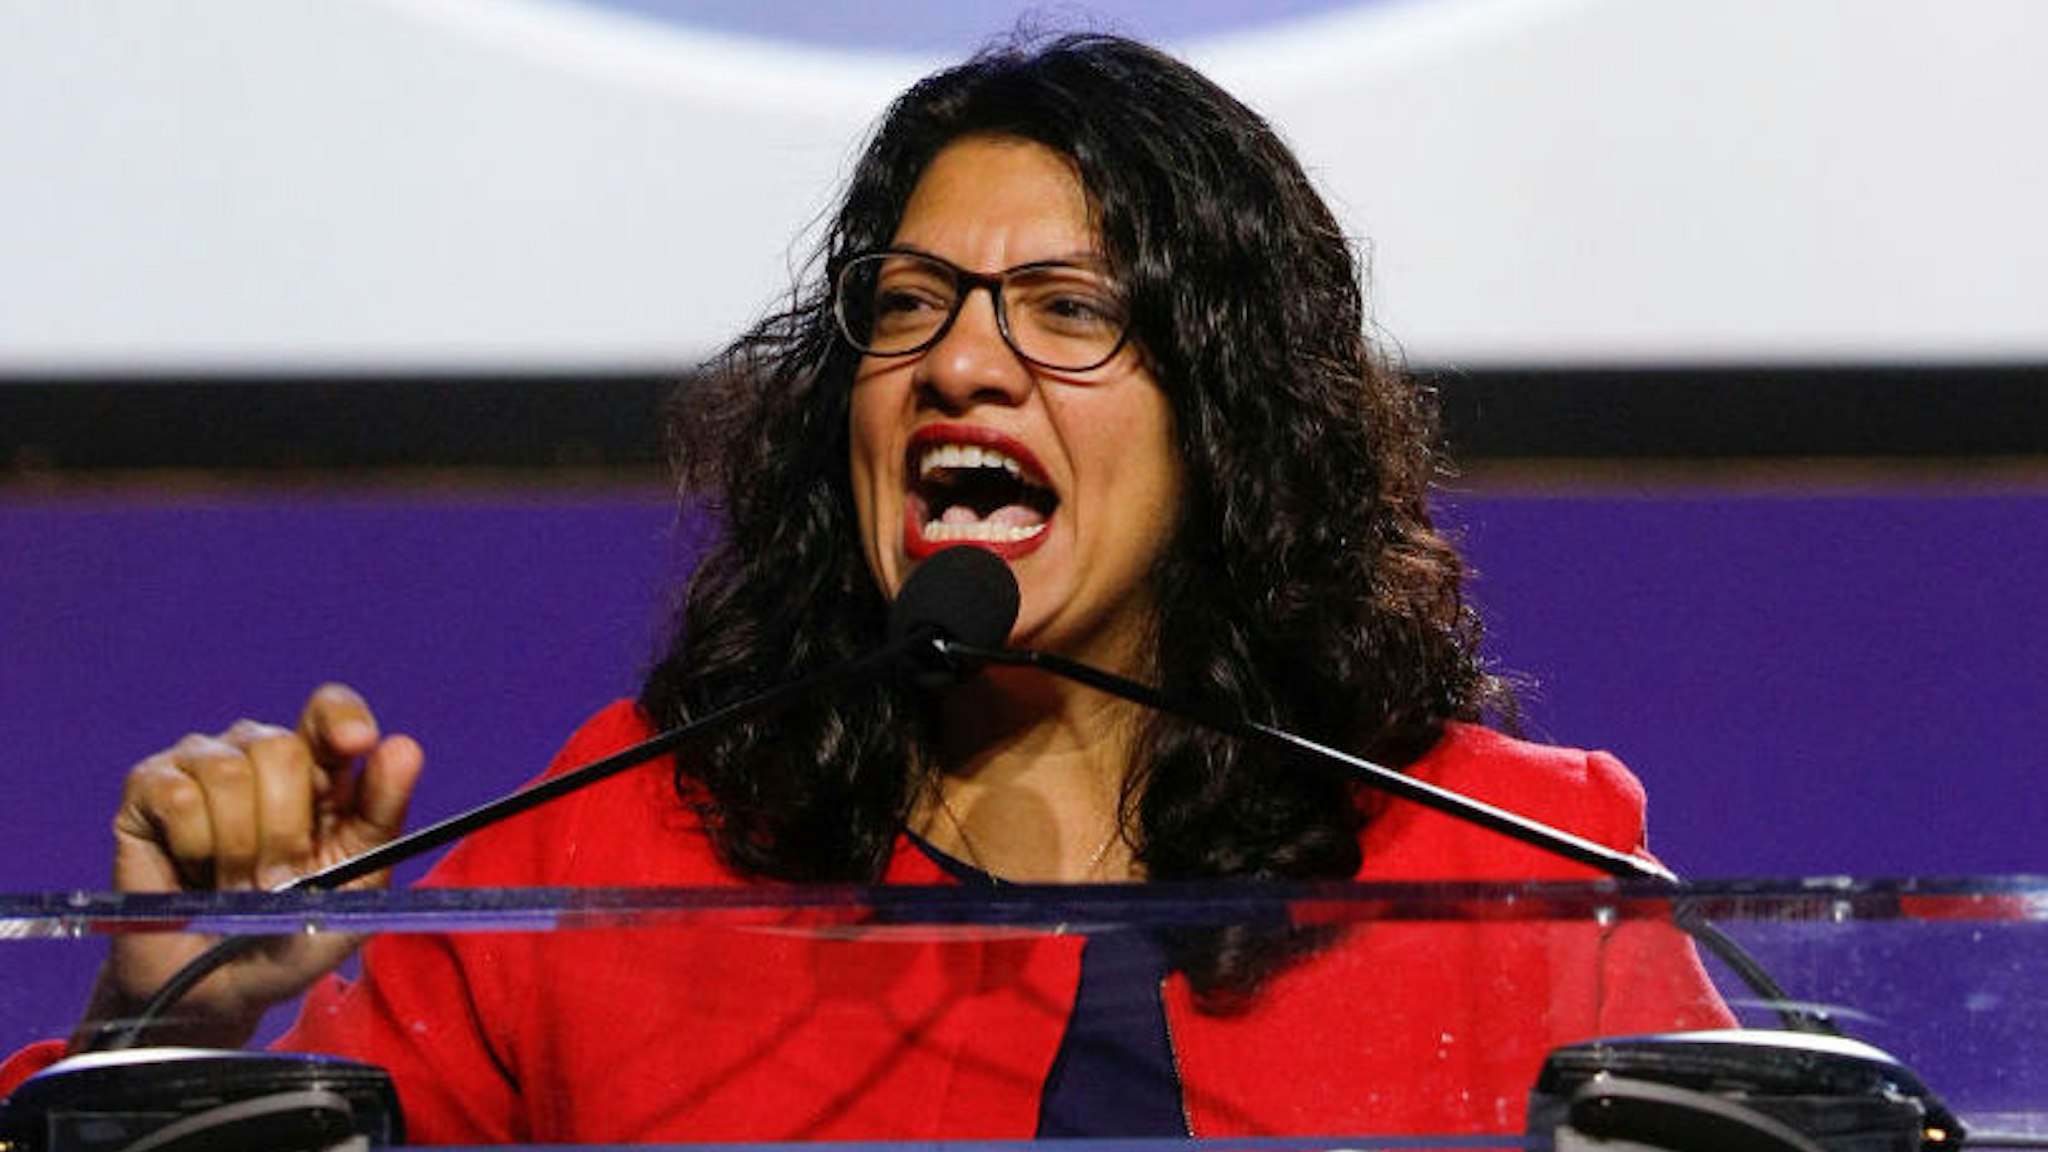 DETROIT, MI - JULY 22: U.S. Representative Rashida Tlaib (D-MI) speaks at the opening plenary session of the NAACP 110th National Convention on July 22, 2019 in Detroit, Michigan. The Convention is from July 20 to July 24 at Detroit’s COBO Center. The theme of this year’s Convention is, “When We Fight, We Win.”